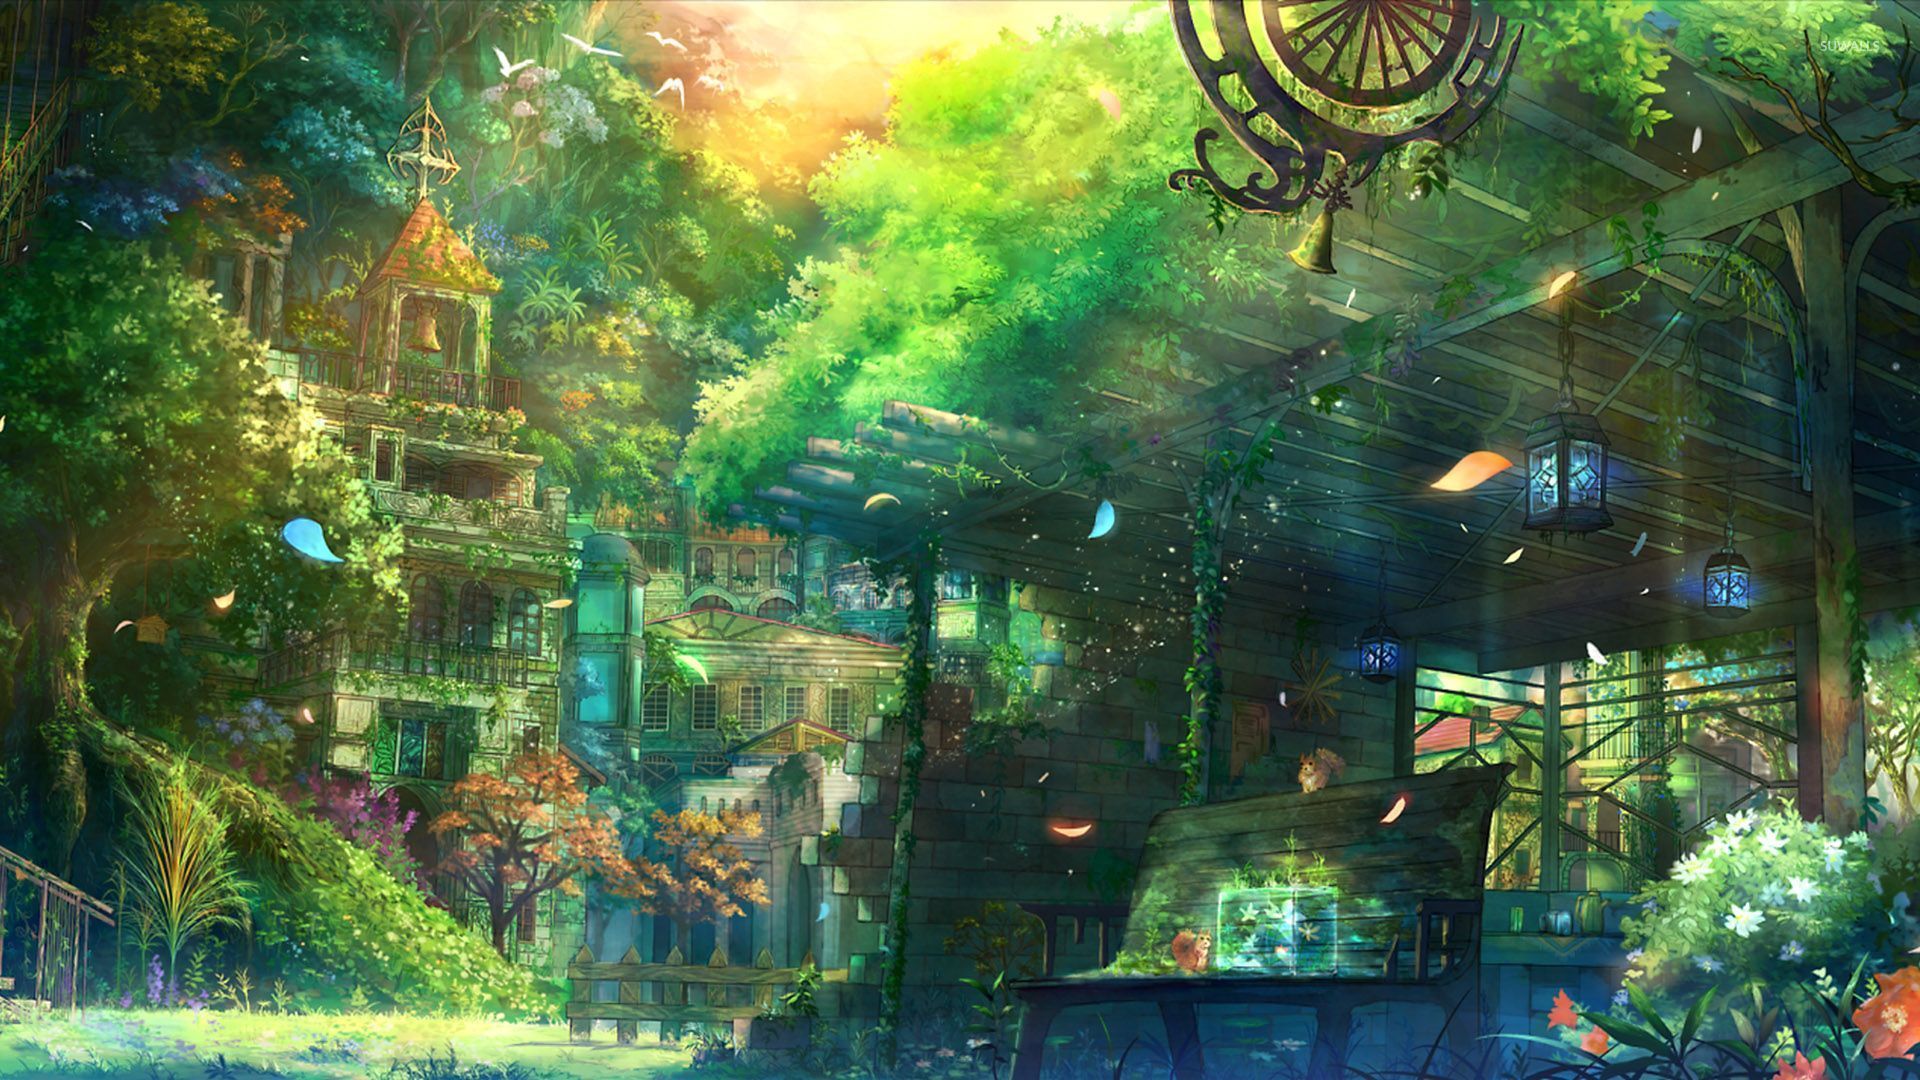 A forested anime city wallpaper - Anime landscape, anime city